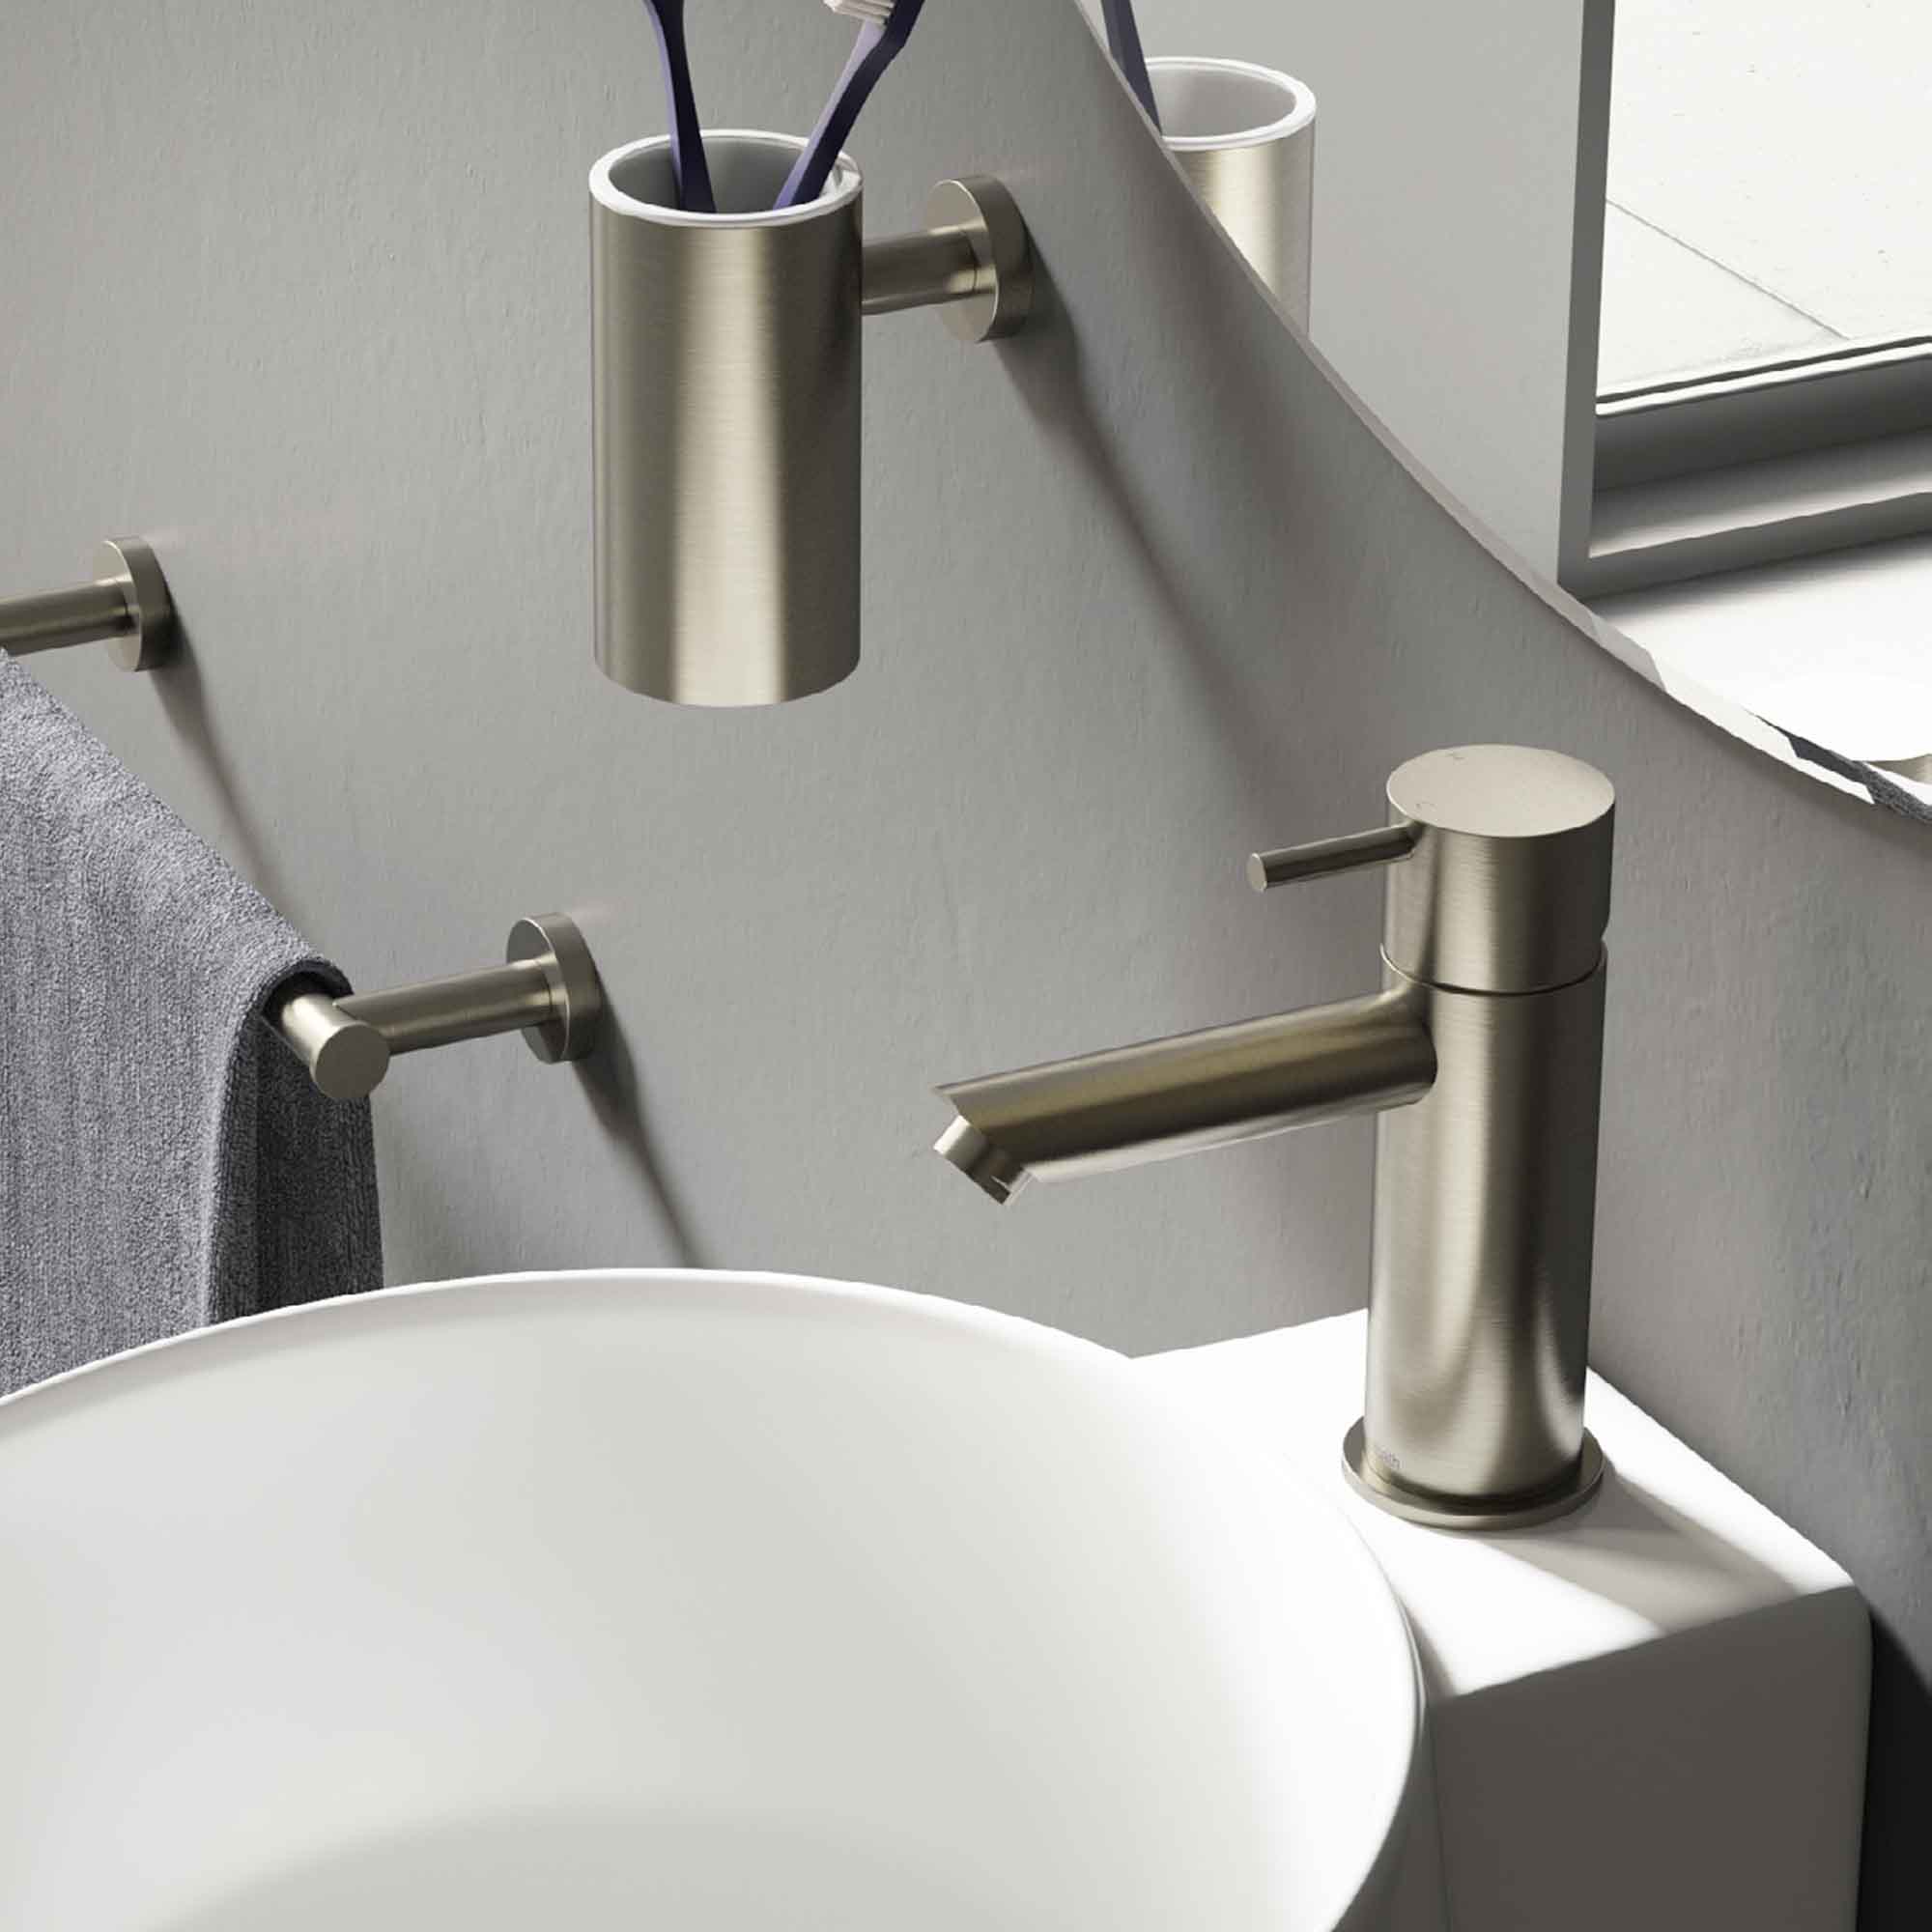 cobber basin mixer tap monobloc straight spout brushed nickel